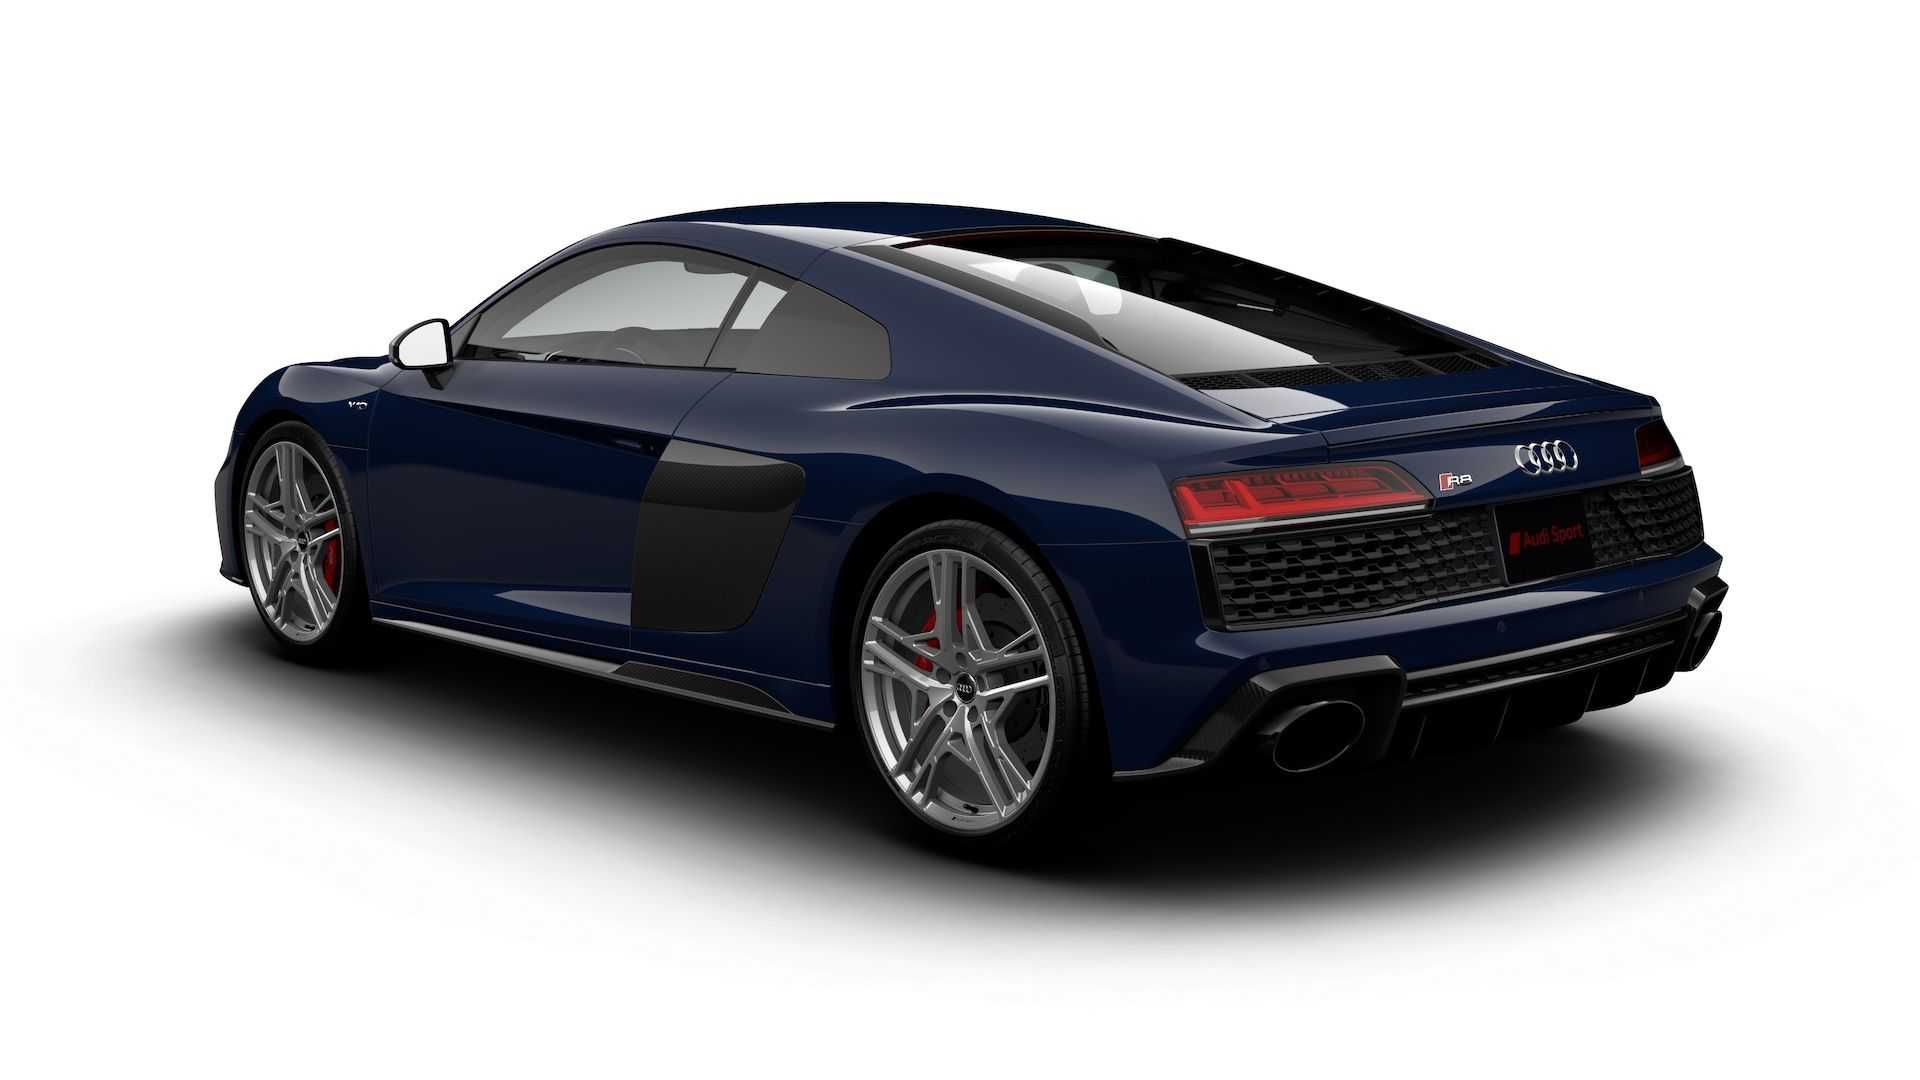 Say Goodbye to Audi's R8 V10 With a New Limited Edition